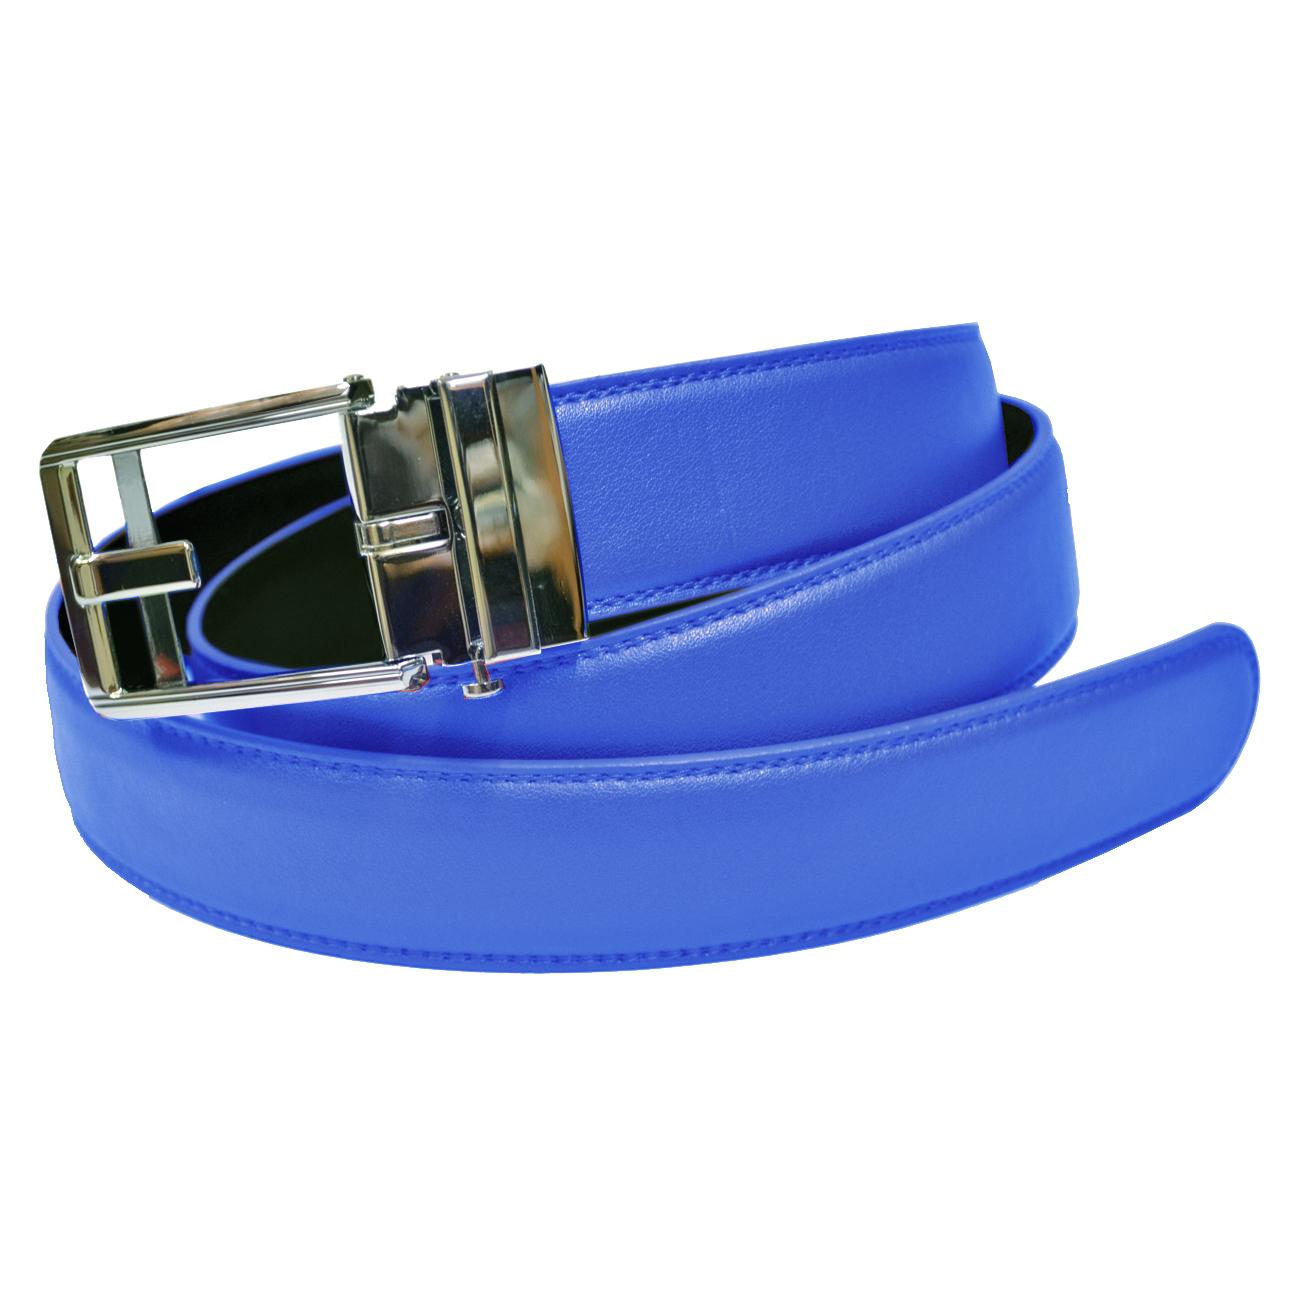 New faux leather Men's Belt Adjustable strap Royal blue with Silver buckle 